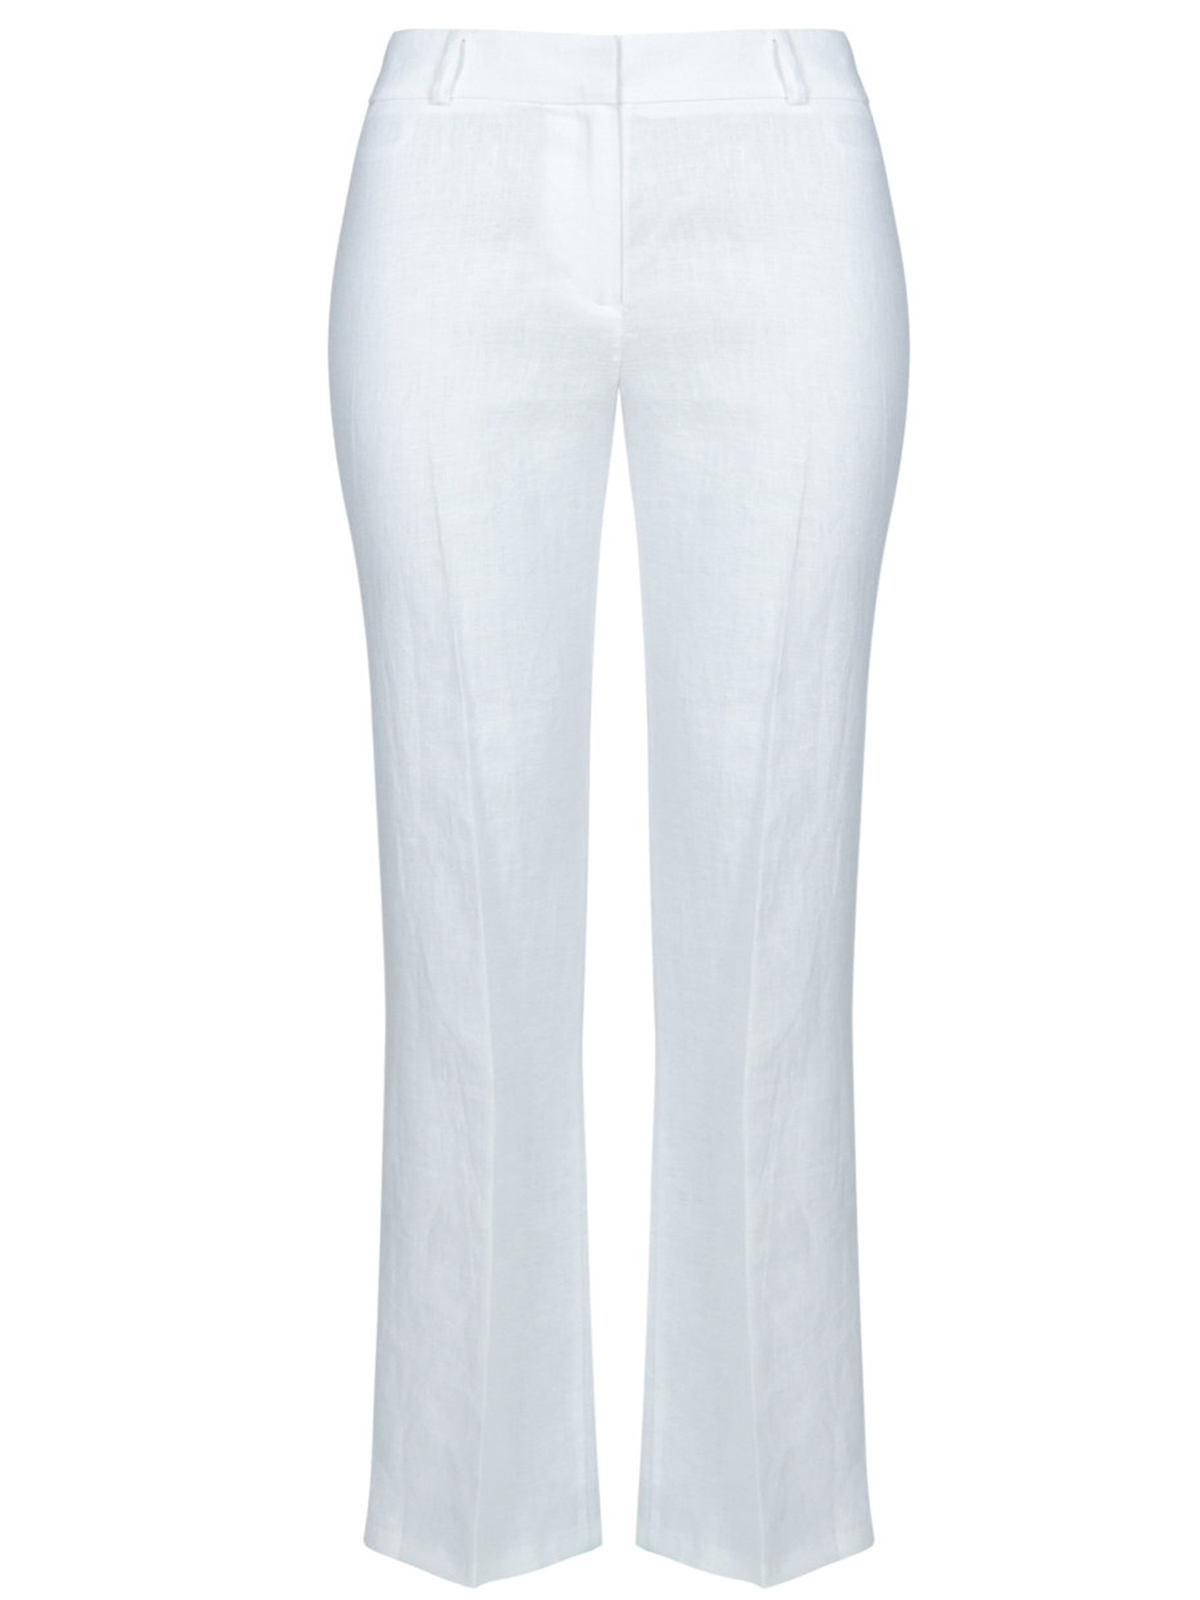 Marks and Spencer - - M&5 WHITE Pure Linen Straight Leg Trousers - Size ...